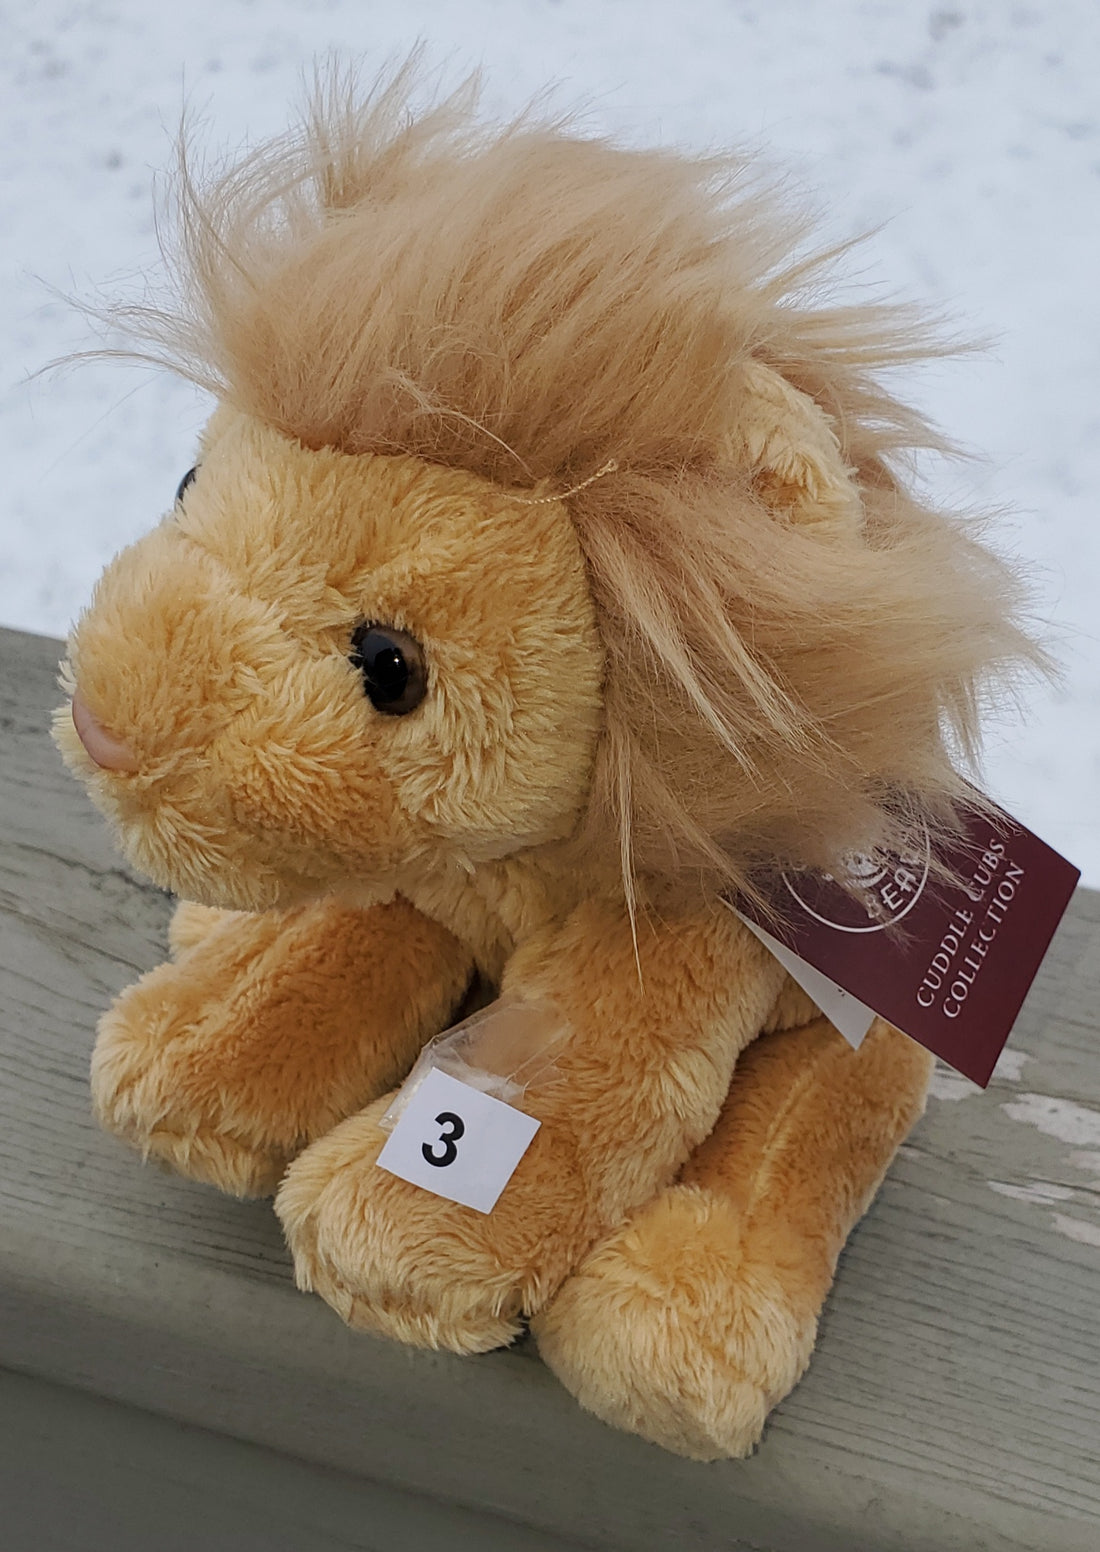 Lion - 5" Baby-Safe Cuddle Cubs Plush by Charlie Bears